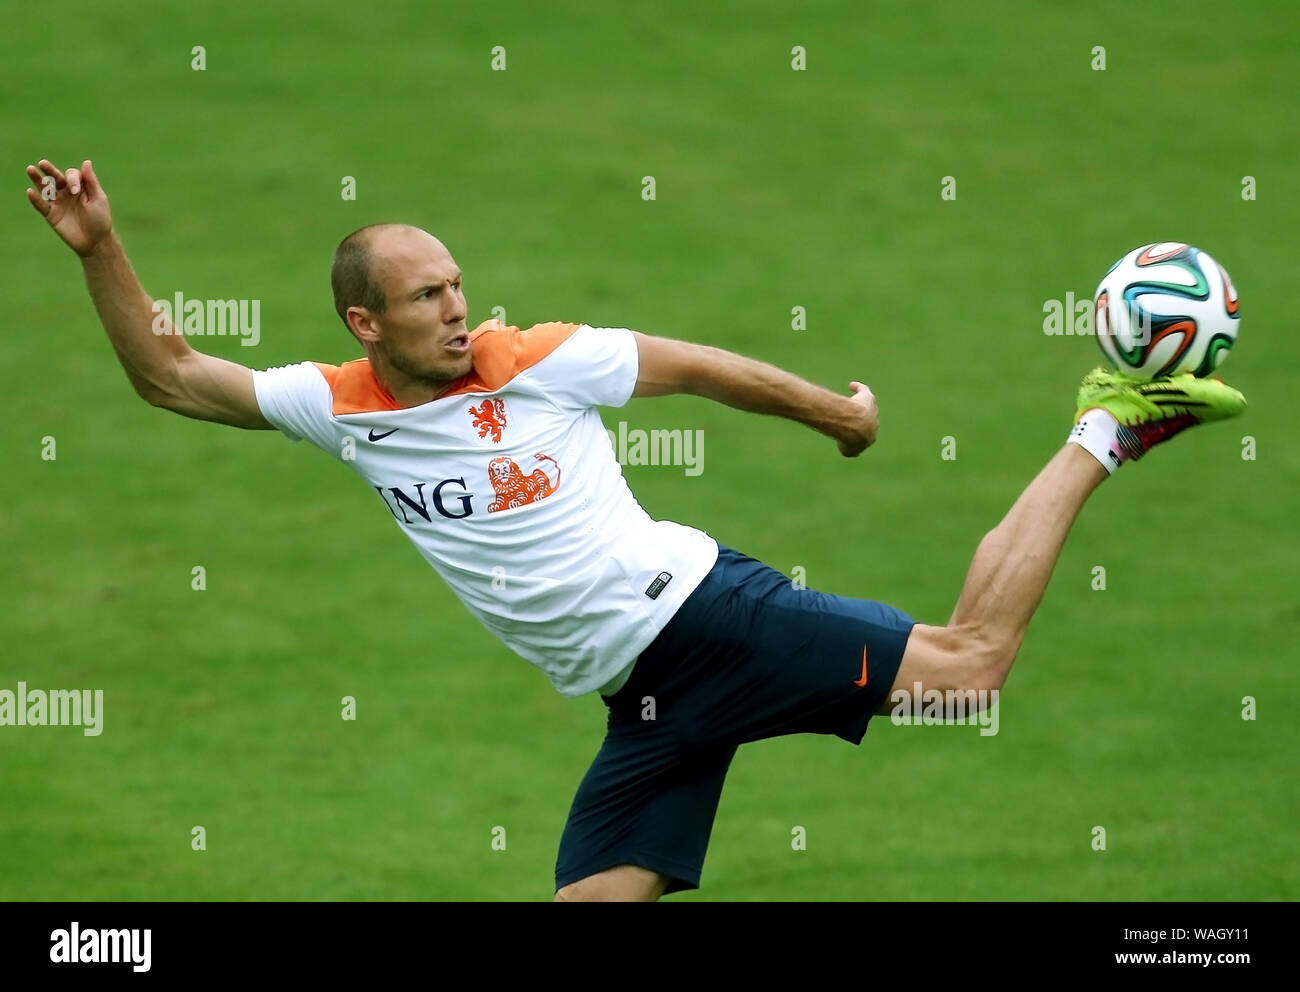 Rio de Janeiro, June 10, 2014. Player Robben of the Dutch soccer team in training at the Clube do Flamengo field during the Soccer World Cup 2014 in t Stock Photo